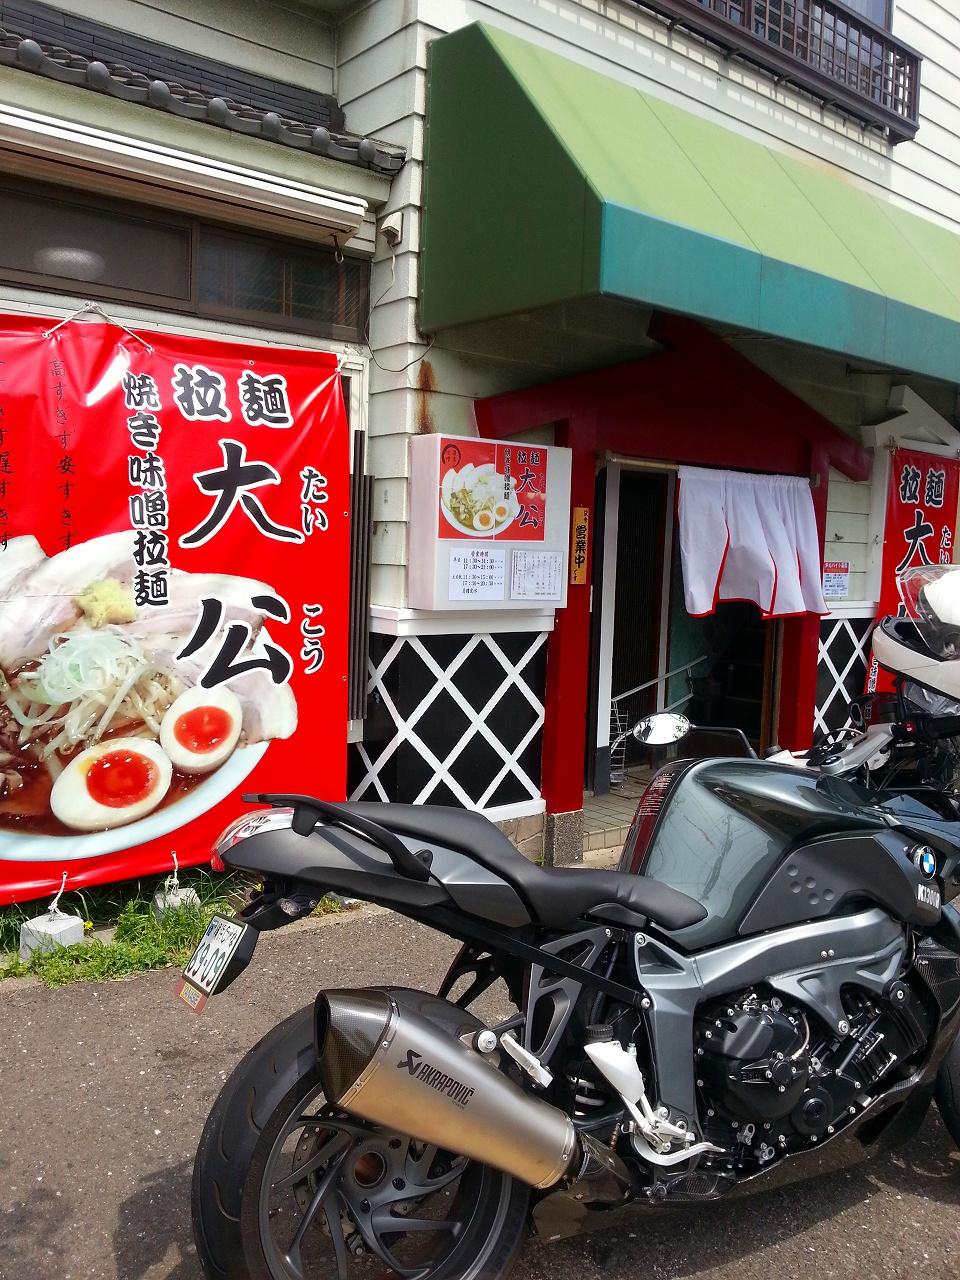 Other Environmental Photo. Kenz staff recommended 680m to the Grand Duke (ramen)